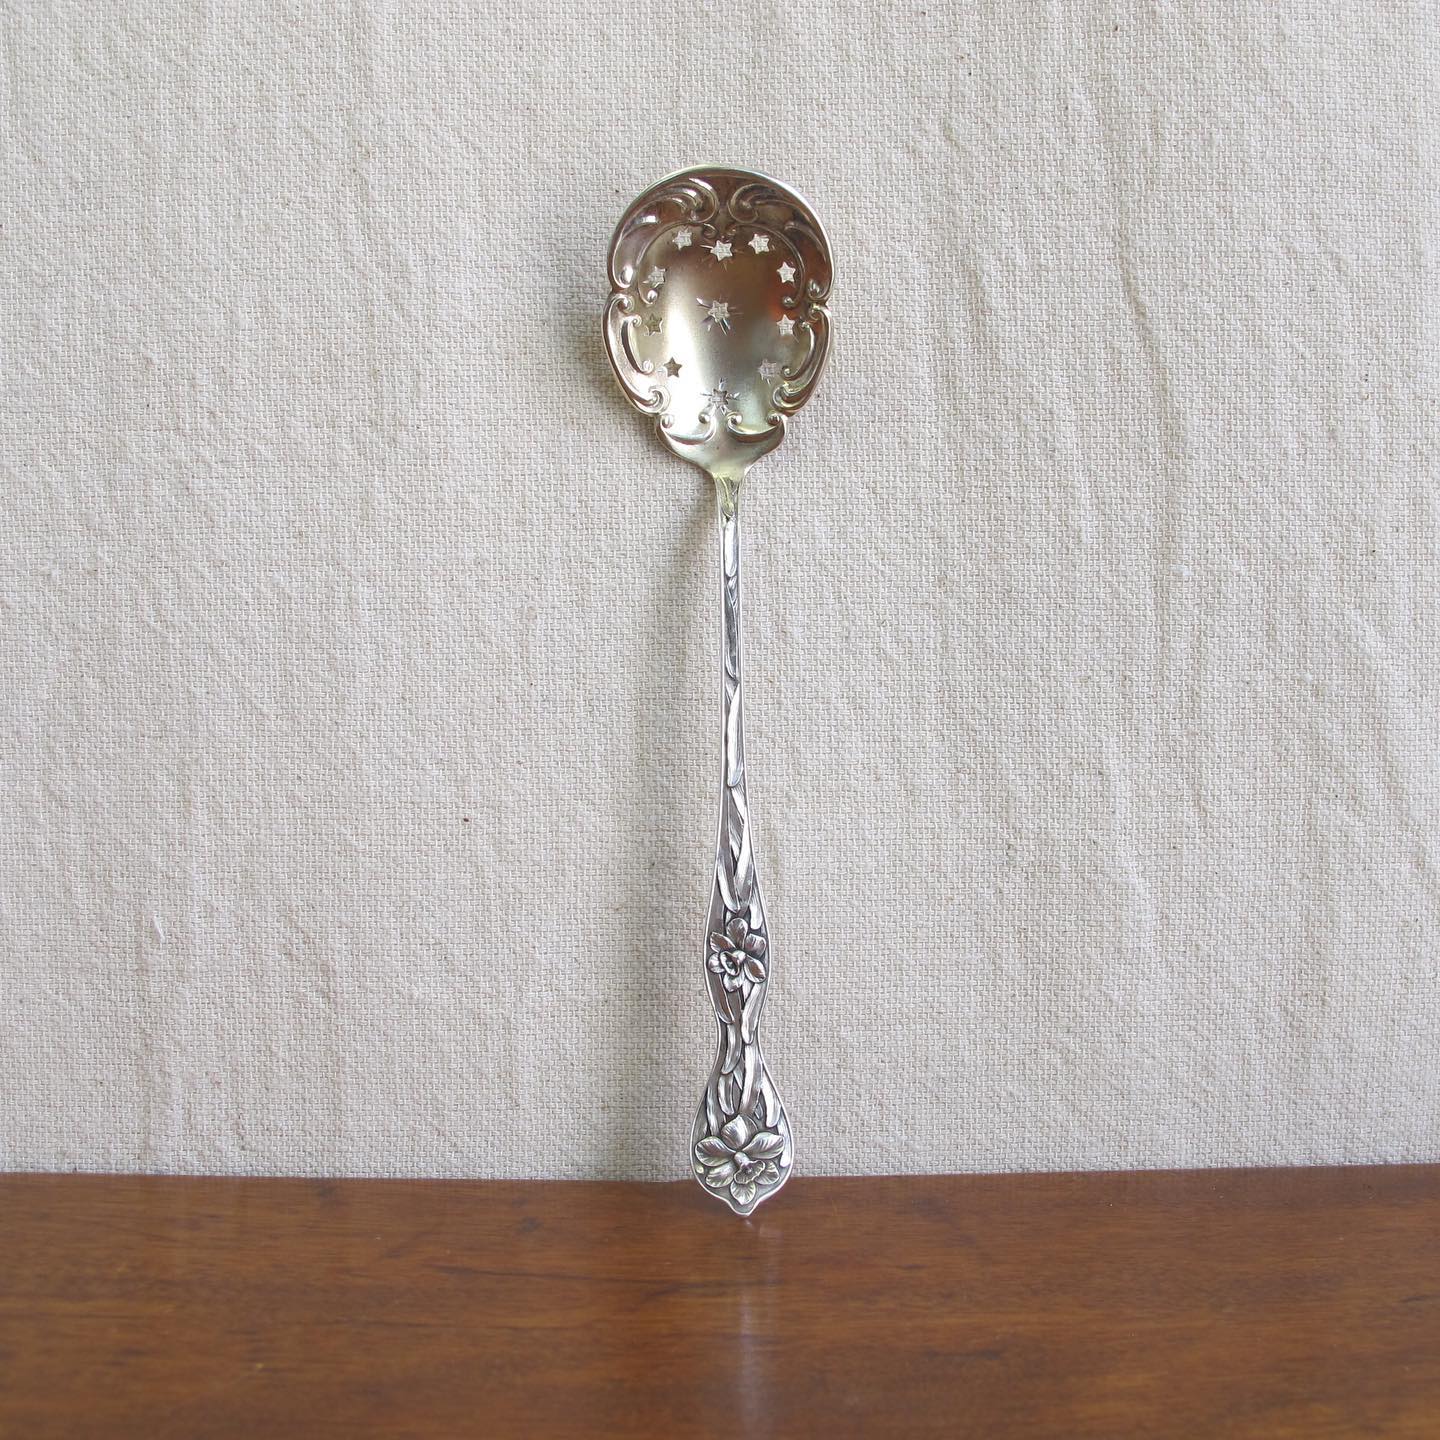 Sterling spoon slotted with stars, handle with daffodils in extraordinary detail, by MANCHESTER MFG. CO, c. 1905